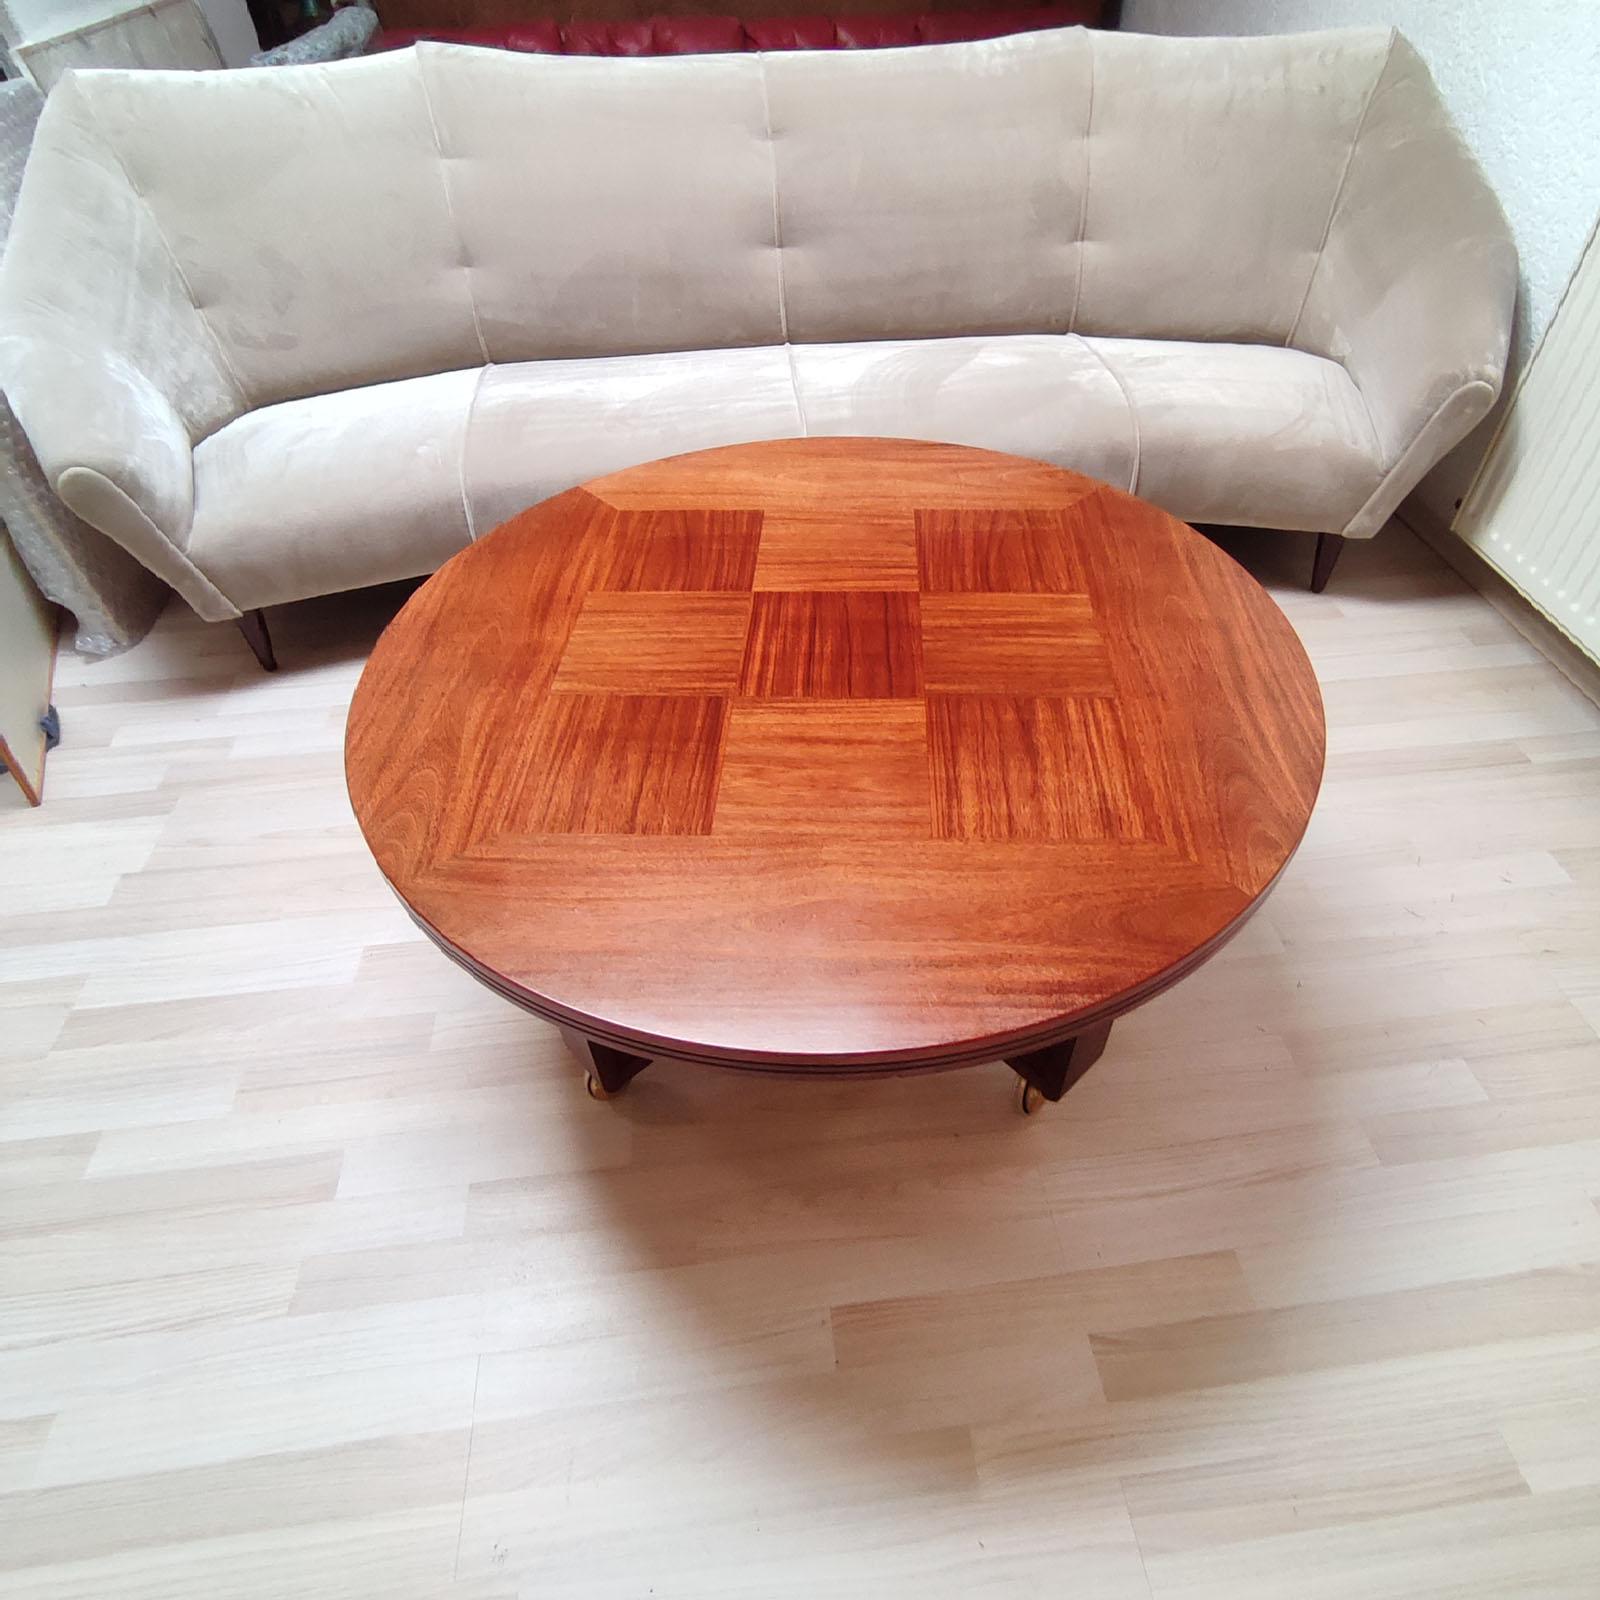 Mahogany Mid-Century Modern Round Coffee Sofa Table on Castors, Sweden 1970s For Sale